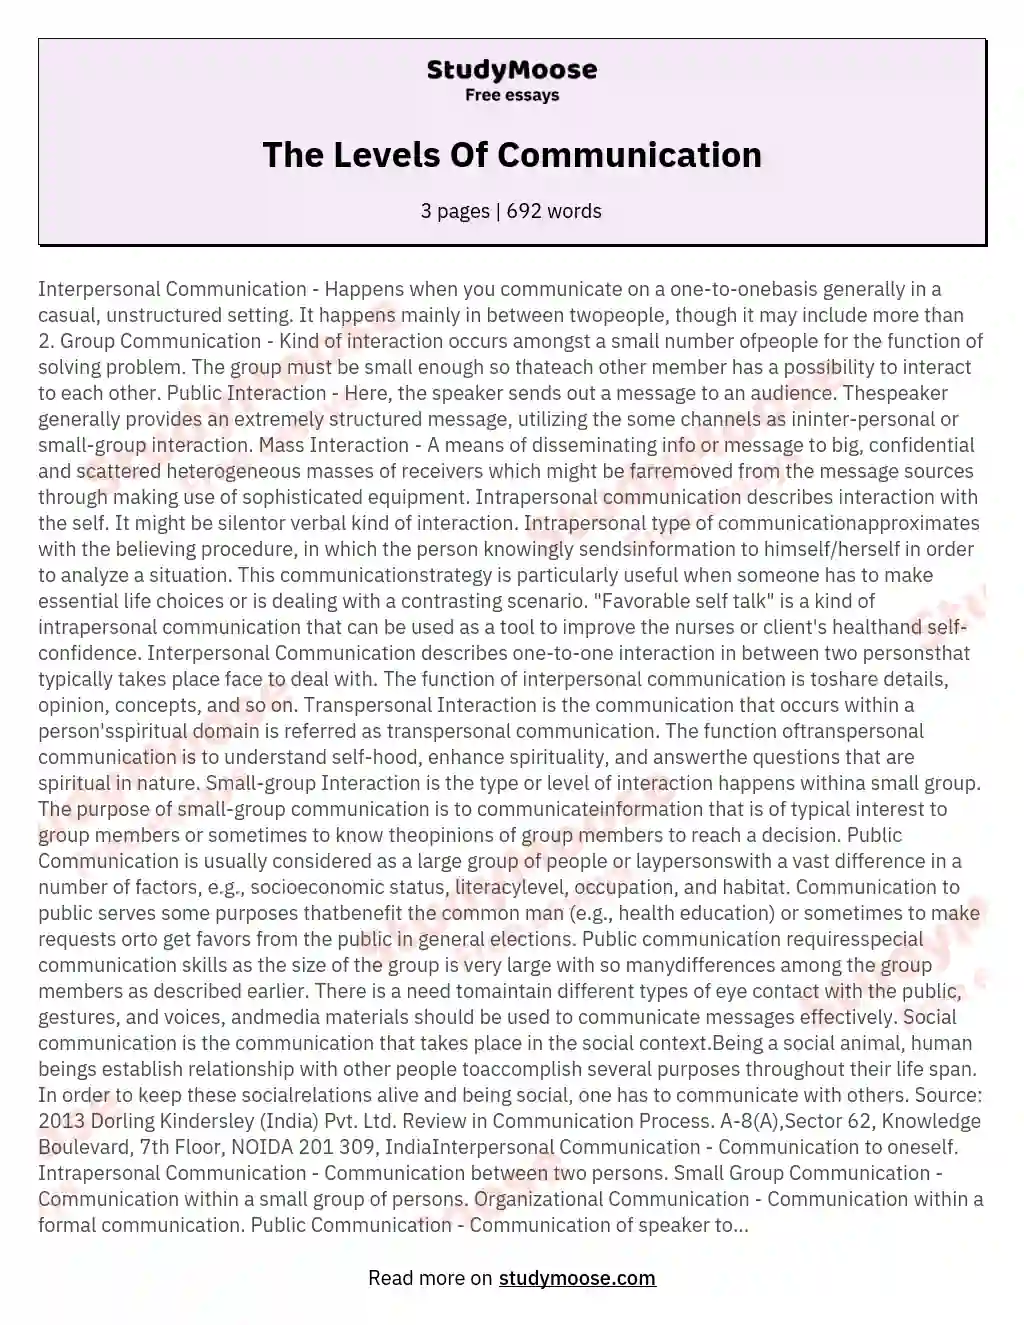 The Levels Of Communication essay